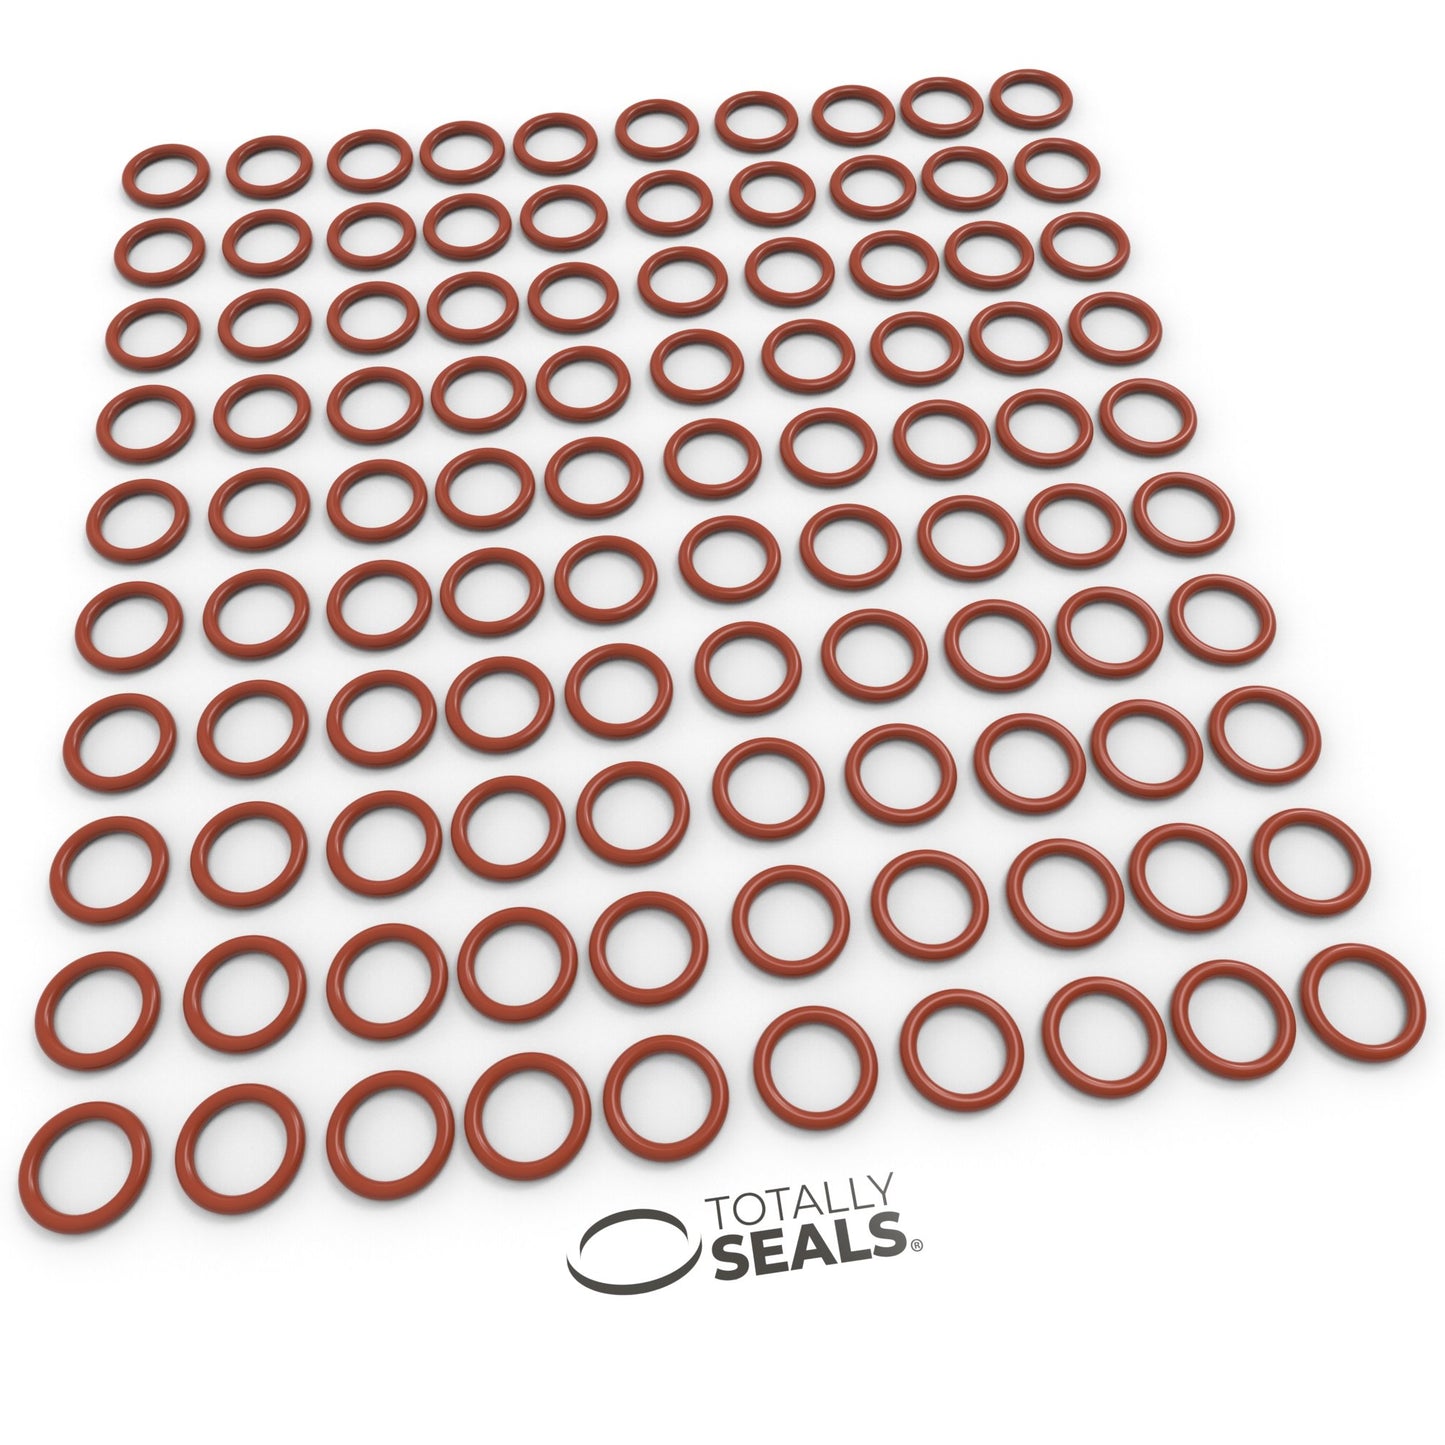 18mm x 2.5mm (23mm OD) Silicone O-Rings - Totally Seals®